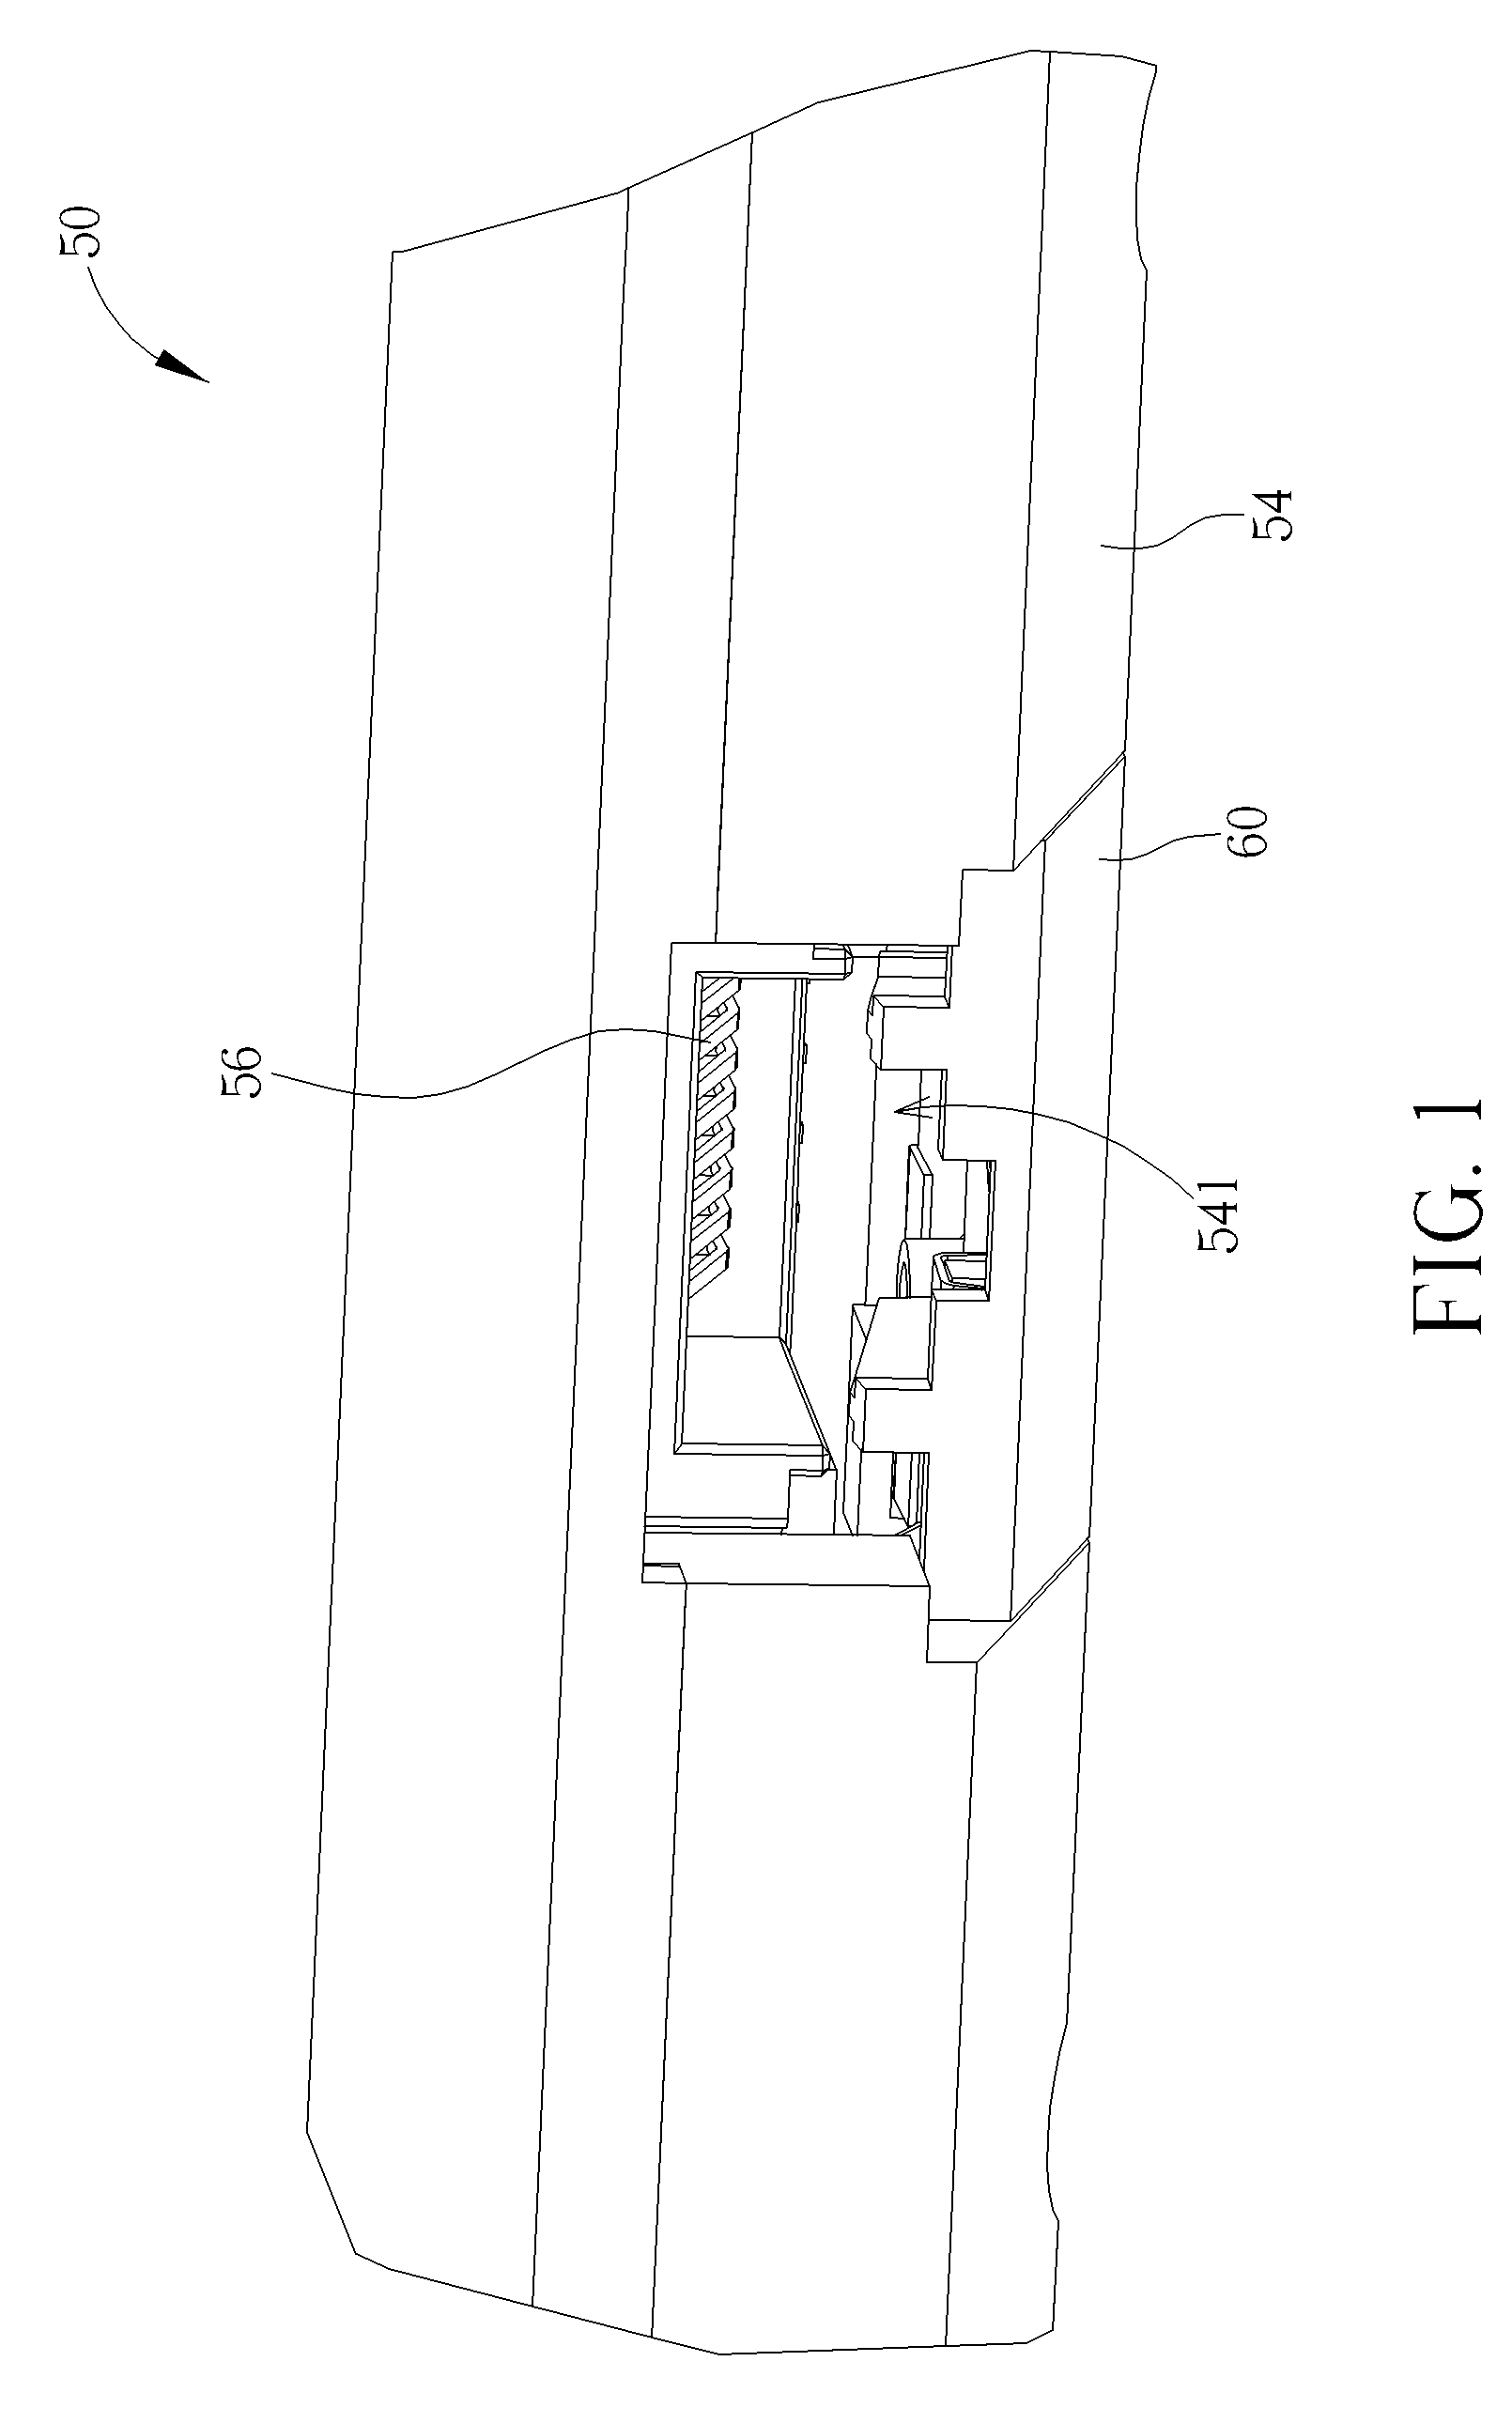 Connector mechanism for connecting a plug